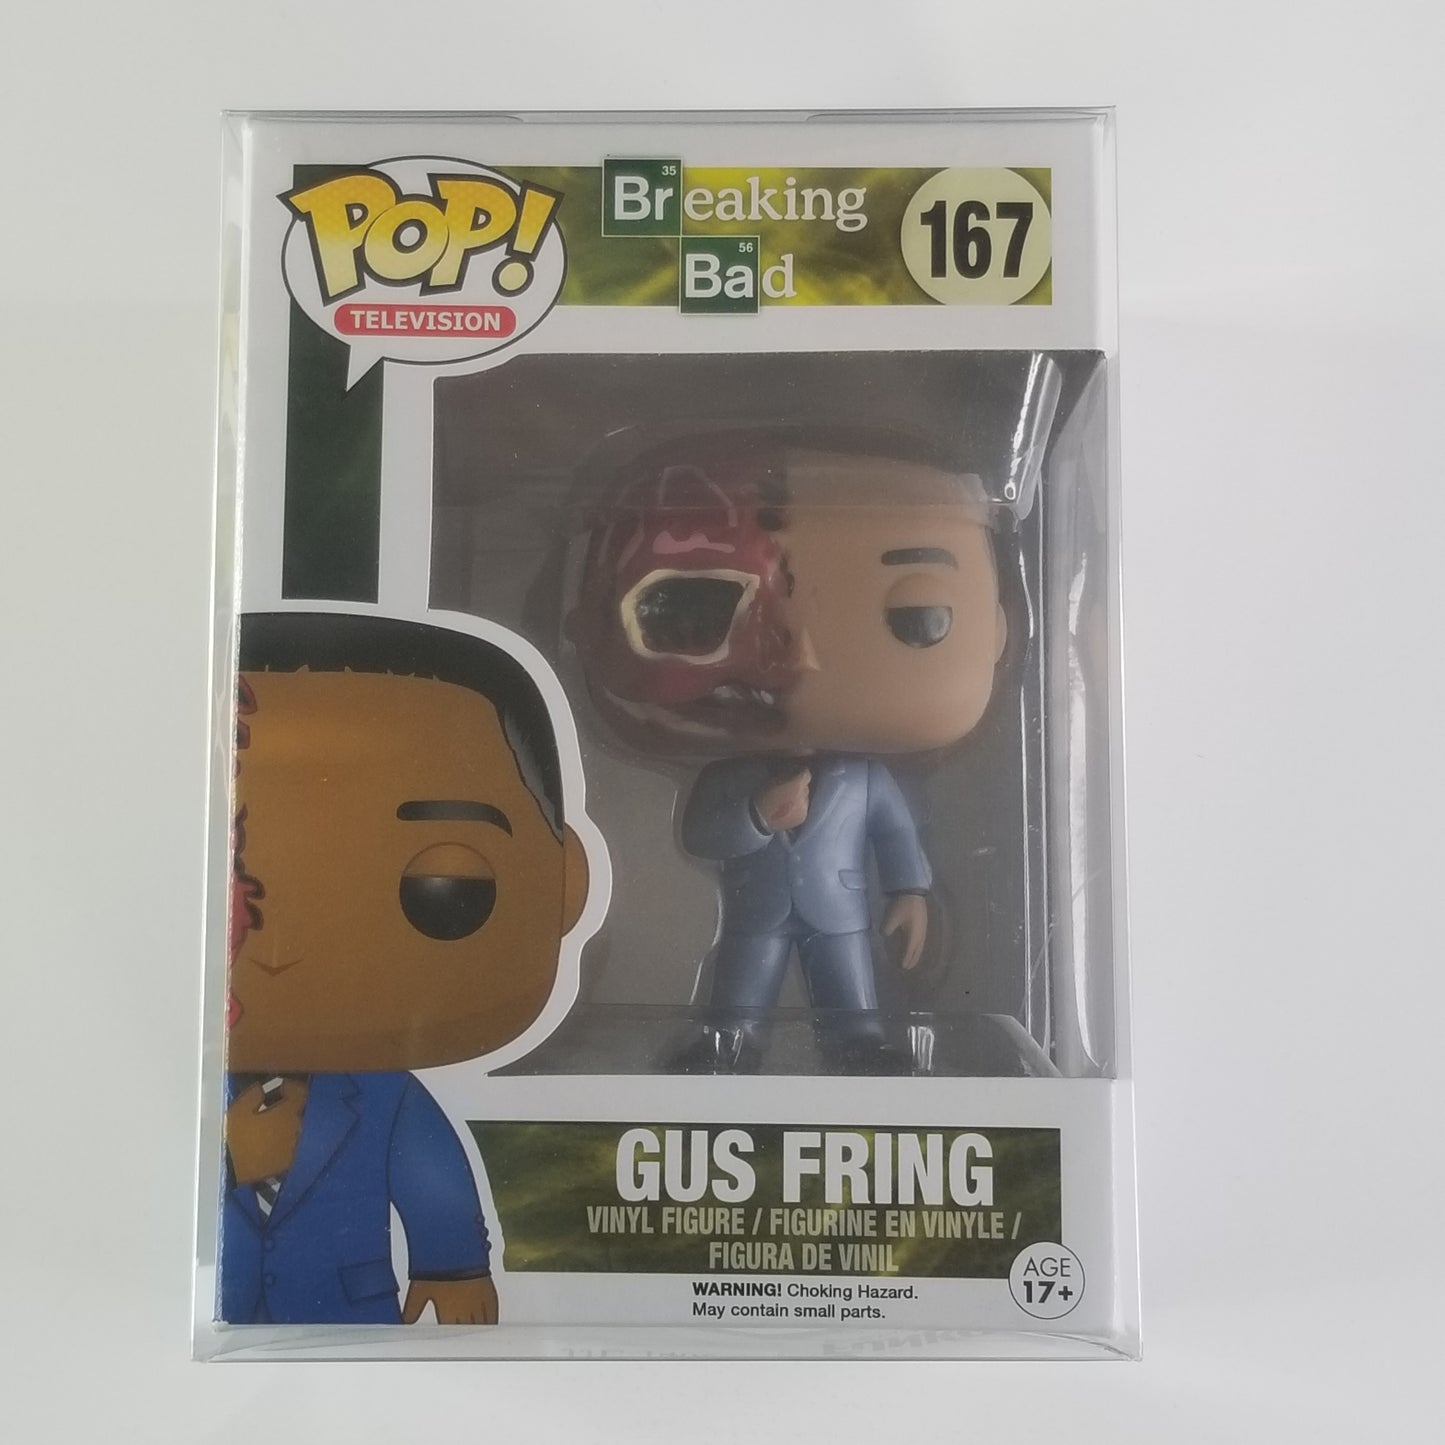 Funko Pop! Television - Gus Fring #167 (Breaking Bad)